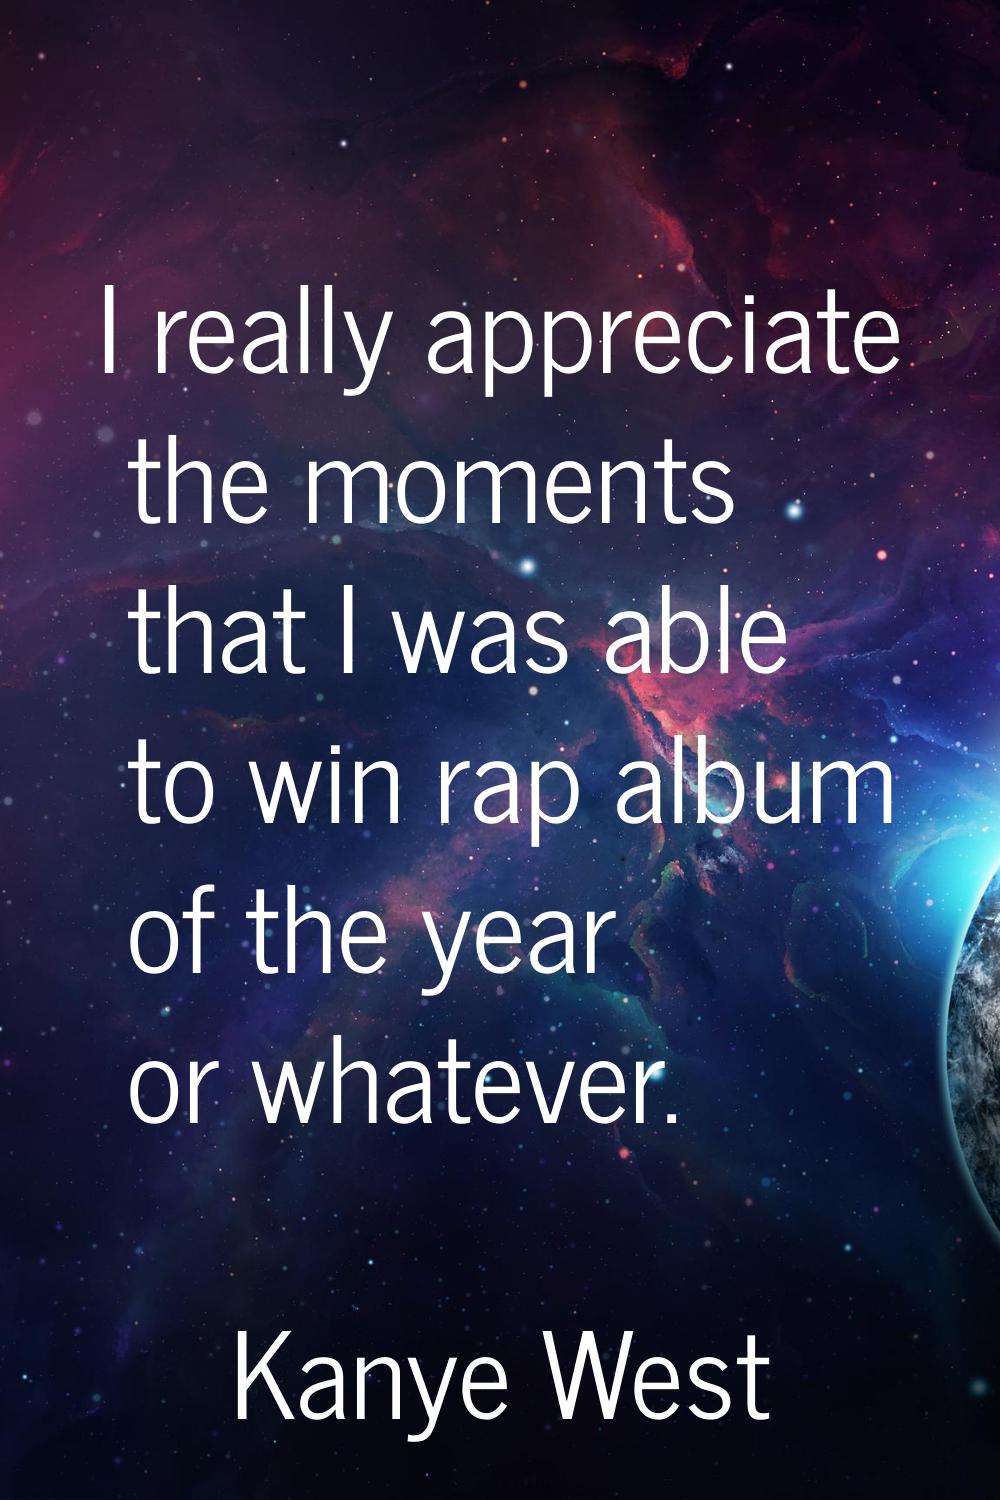 I really appreciate the moments that I was able to win rap album of the year or whatever.